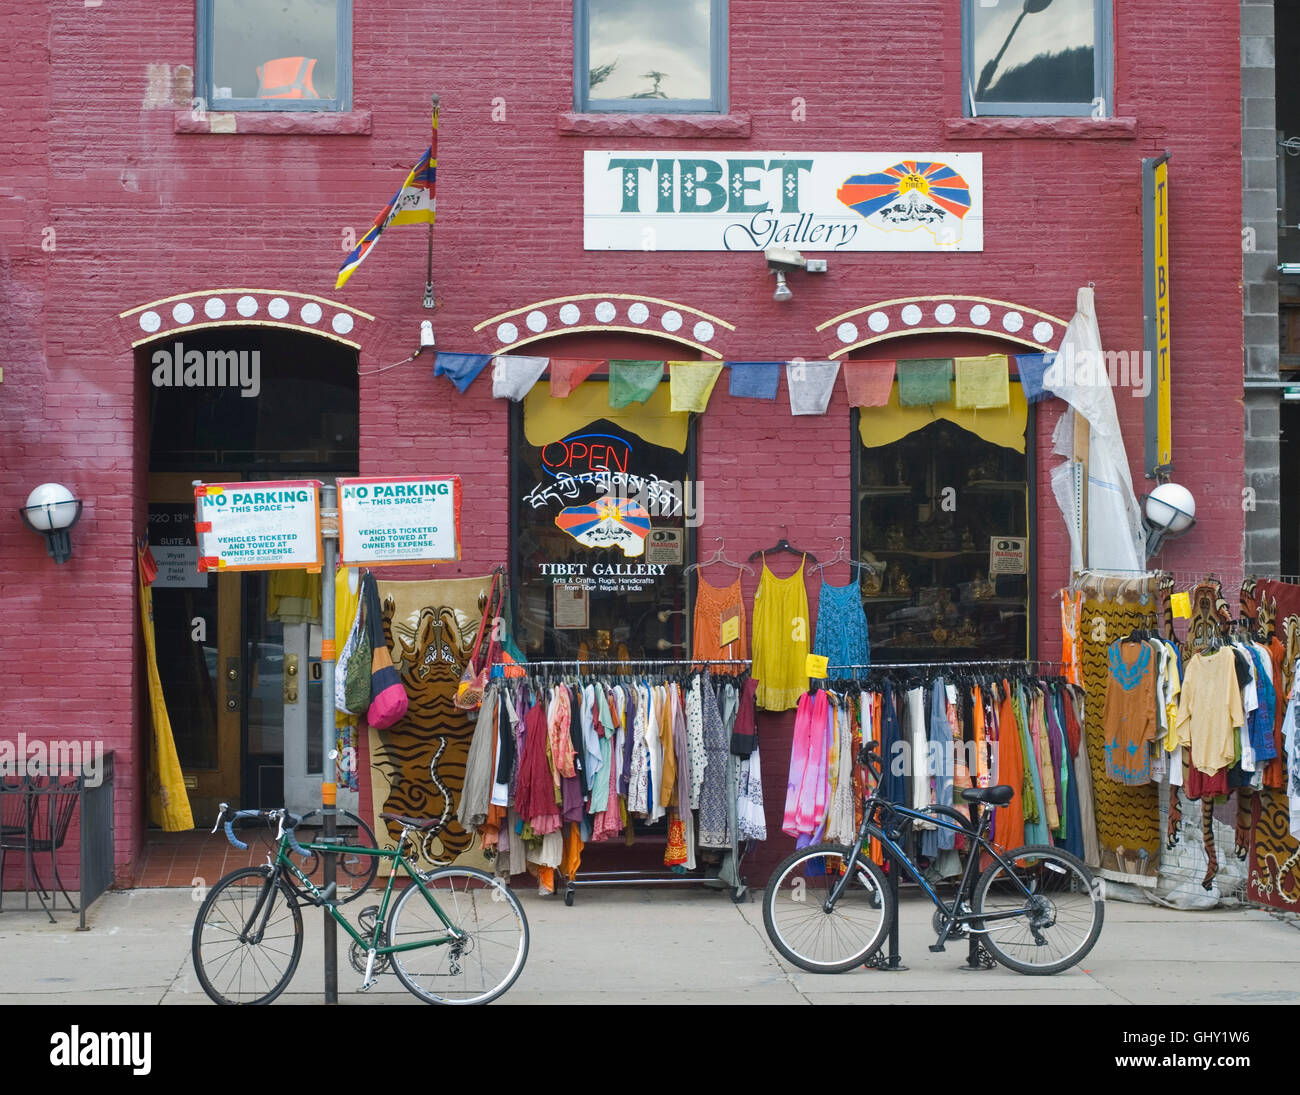 Tibet Gallery, Boulder, Colorado, sells clothes and other items from Tibet, India, Nepal and Bhutan. Stock Photo